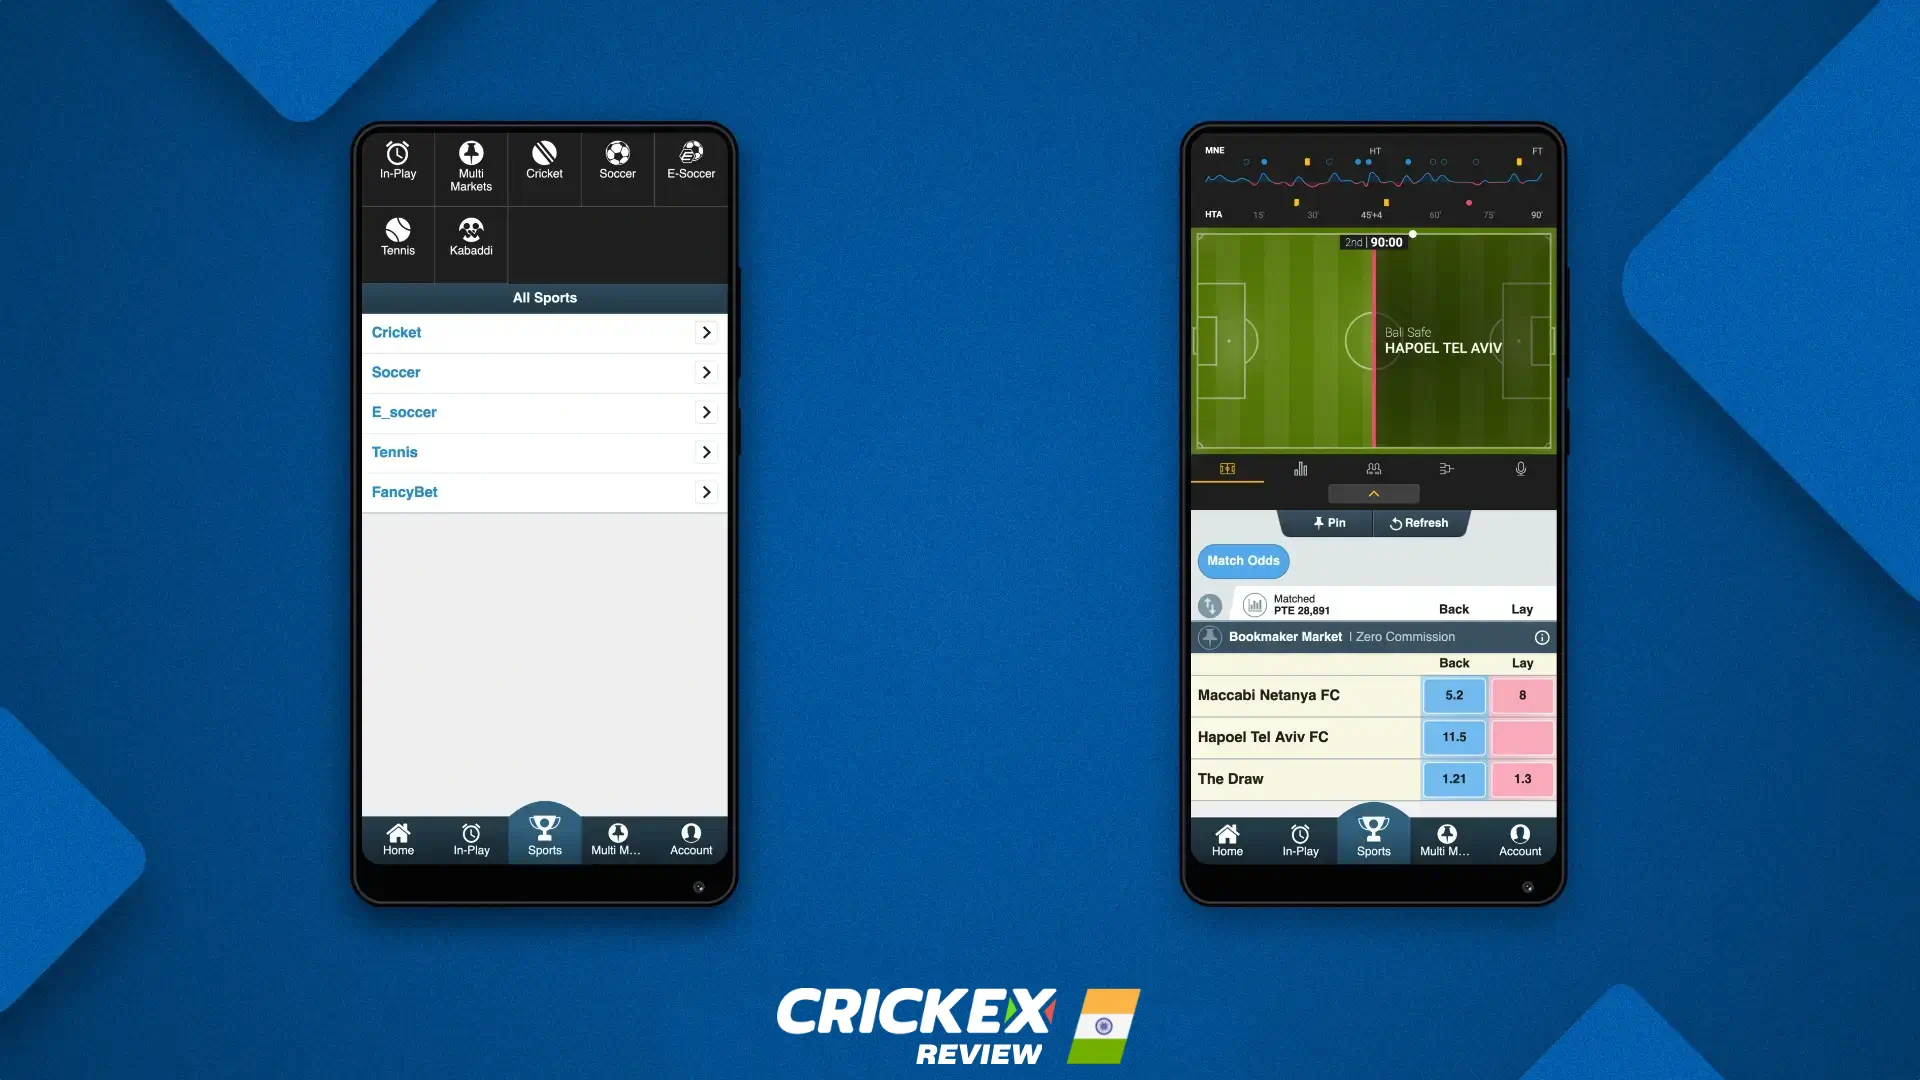 Detailed information about betting exchange in the Crickex mobile app